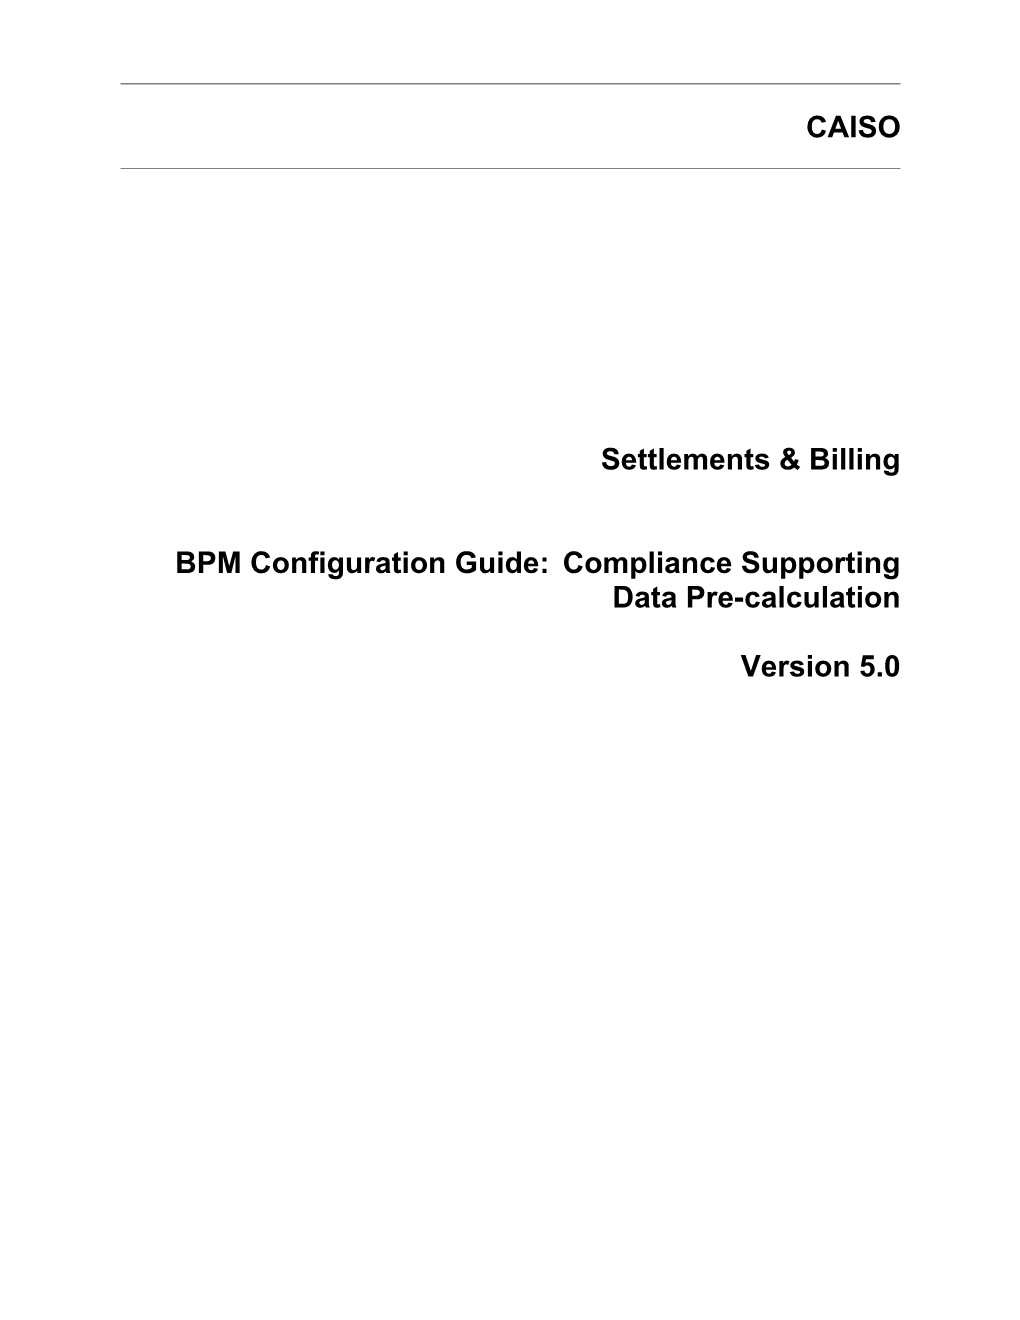 BPM - CG PC Compliance Supporting Data